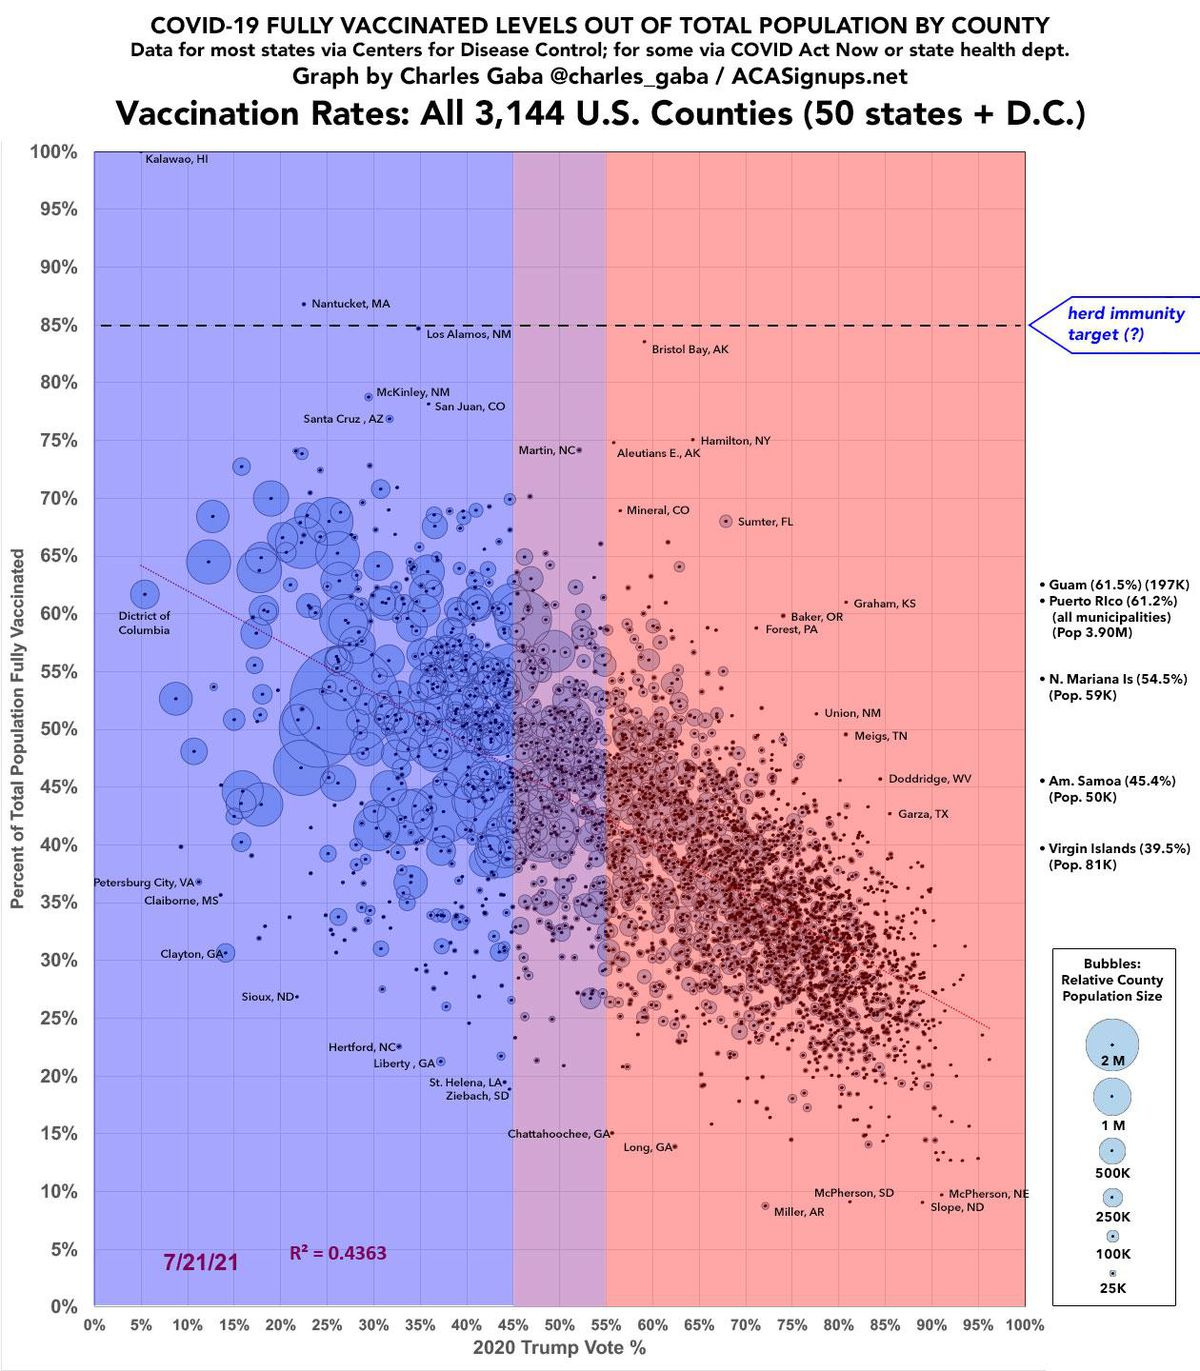 Chart showing vaccination rates across US counties